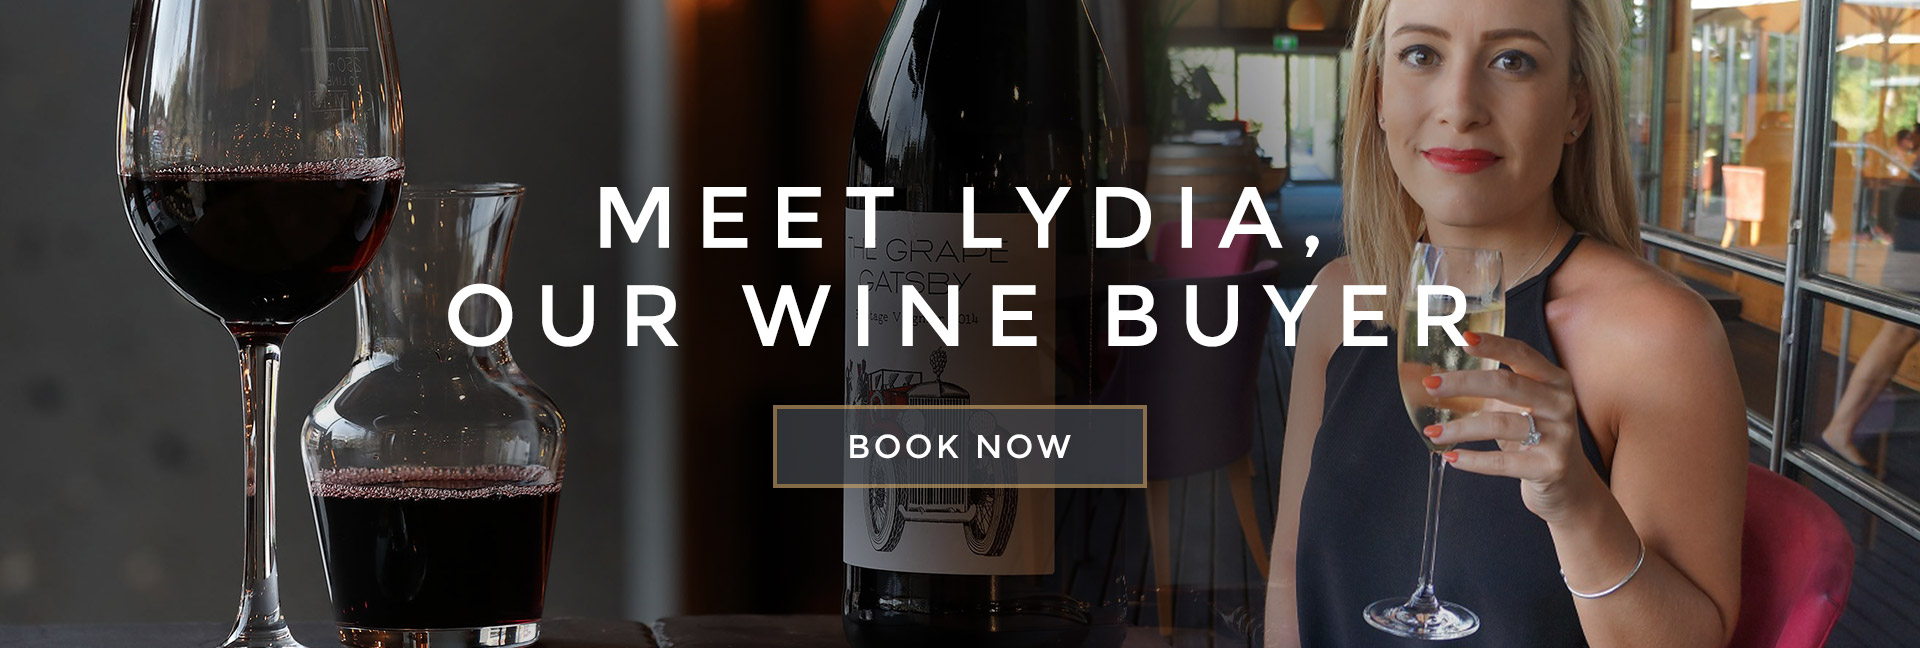 Meet Lydia, our wine buyer at All Bar One Waterloo